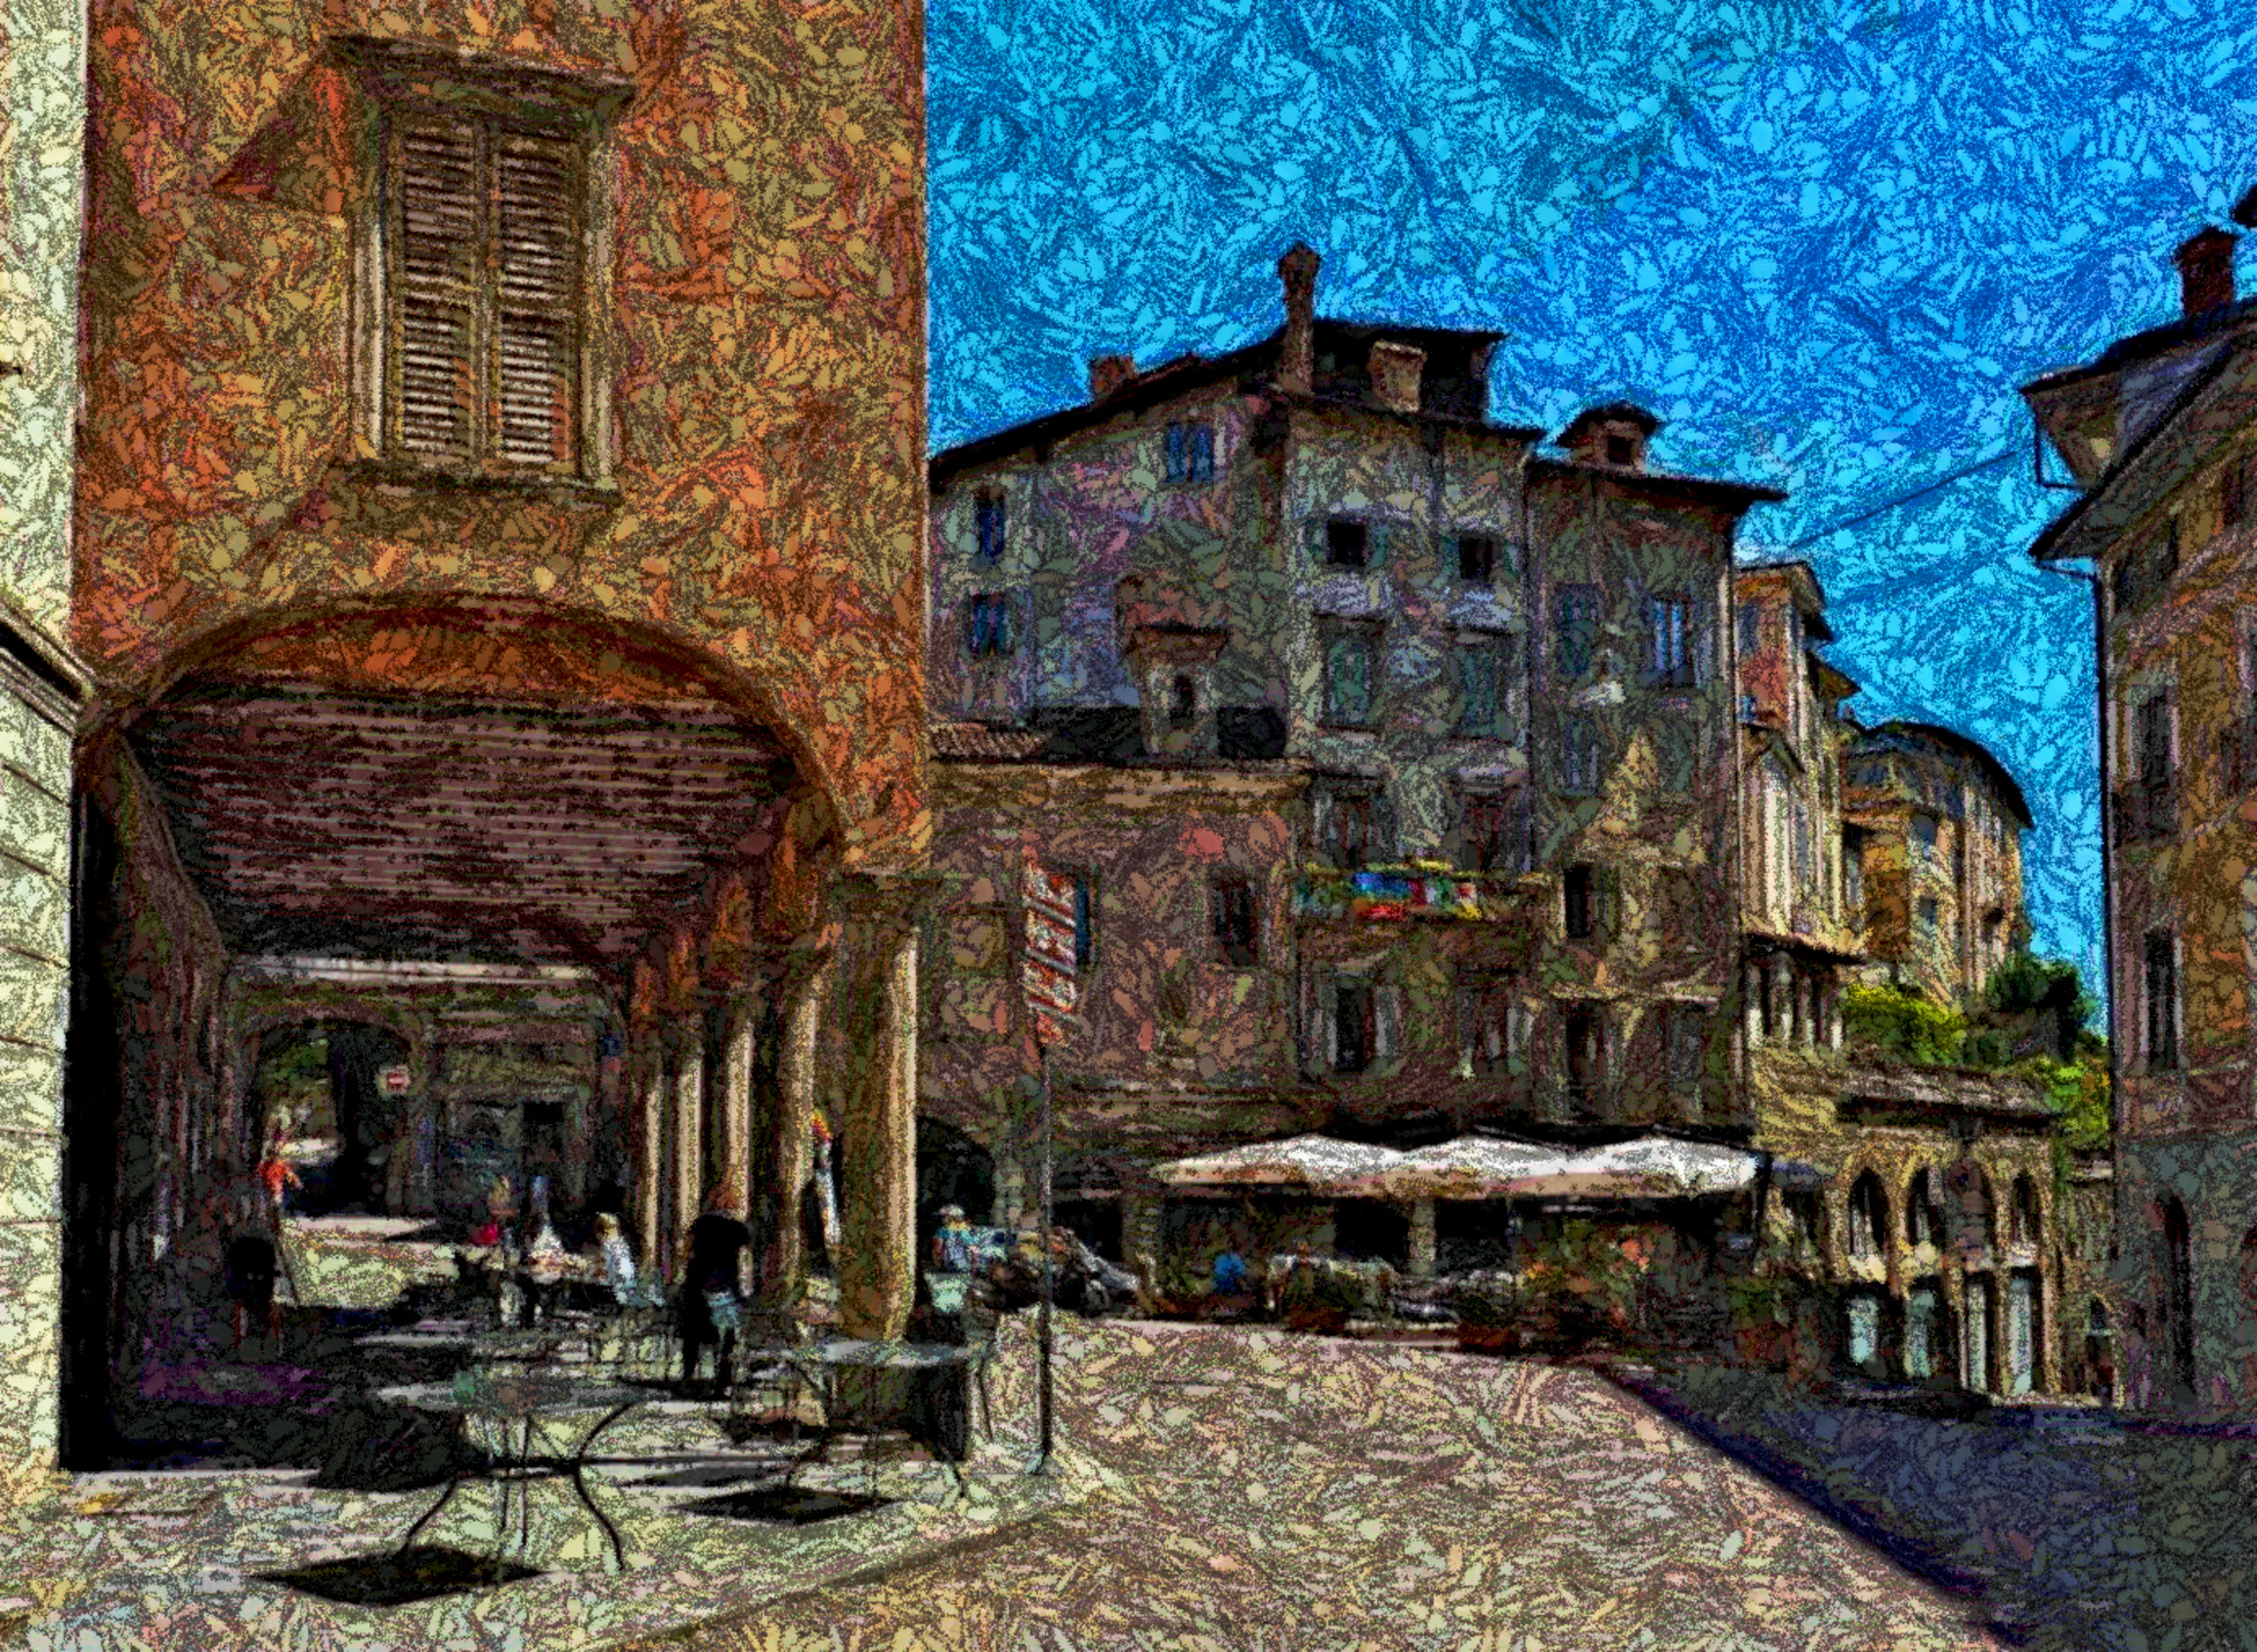 2020-10-03 20-11-40my_bergamo_by_sergiba_de679hf-pre, with a draw effect style C (colour) (hard look) (small texture).jpeg